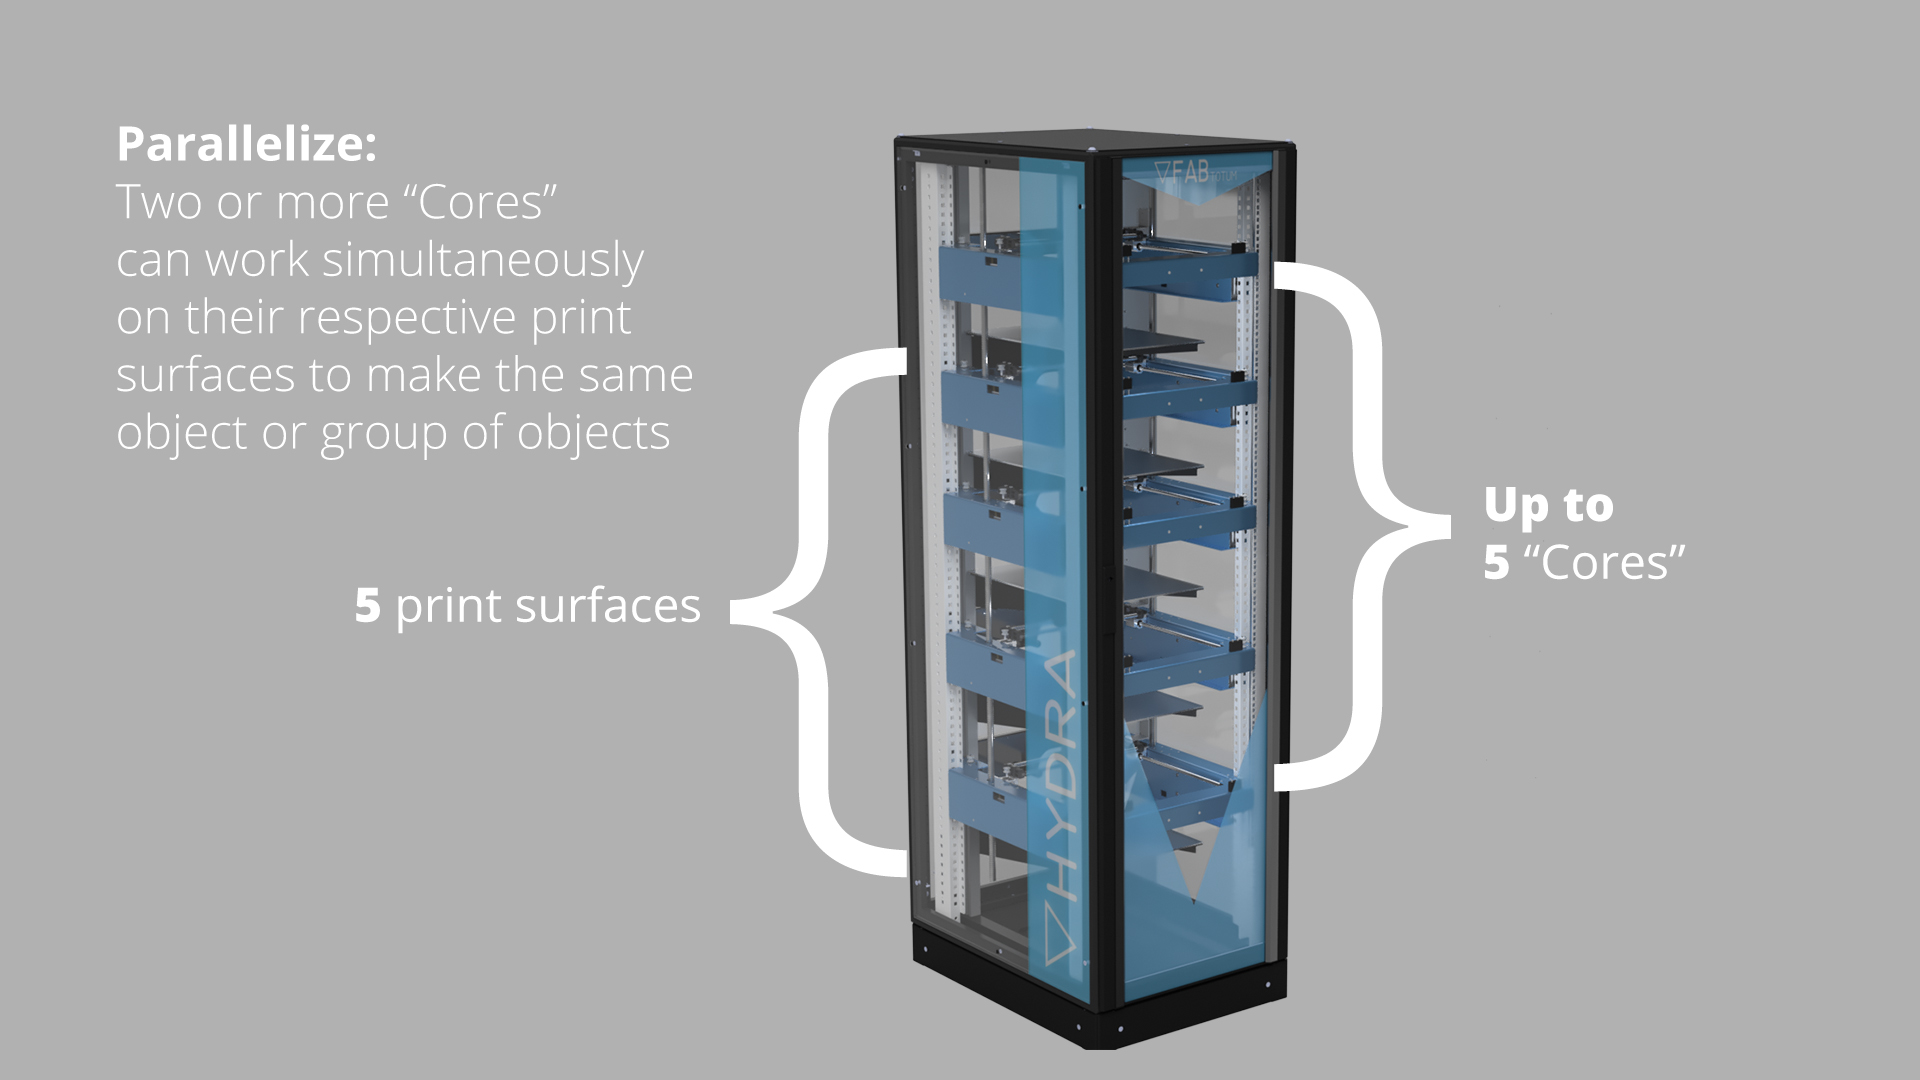 Parallelize your 3D printing: work simultaneously with two or more Cores and print surfaces